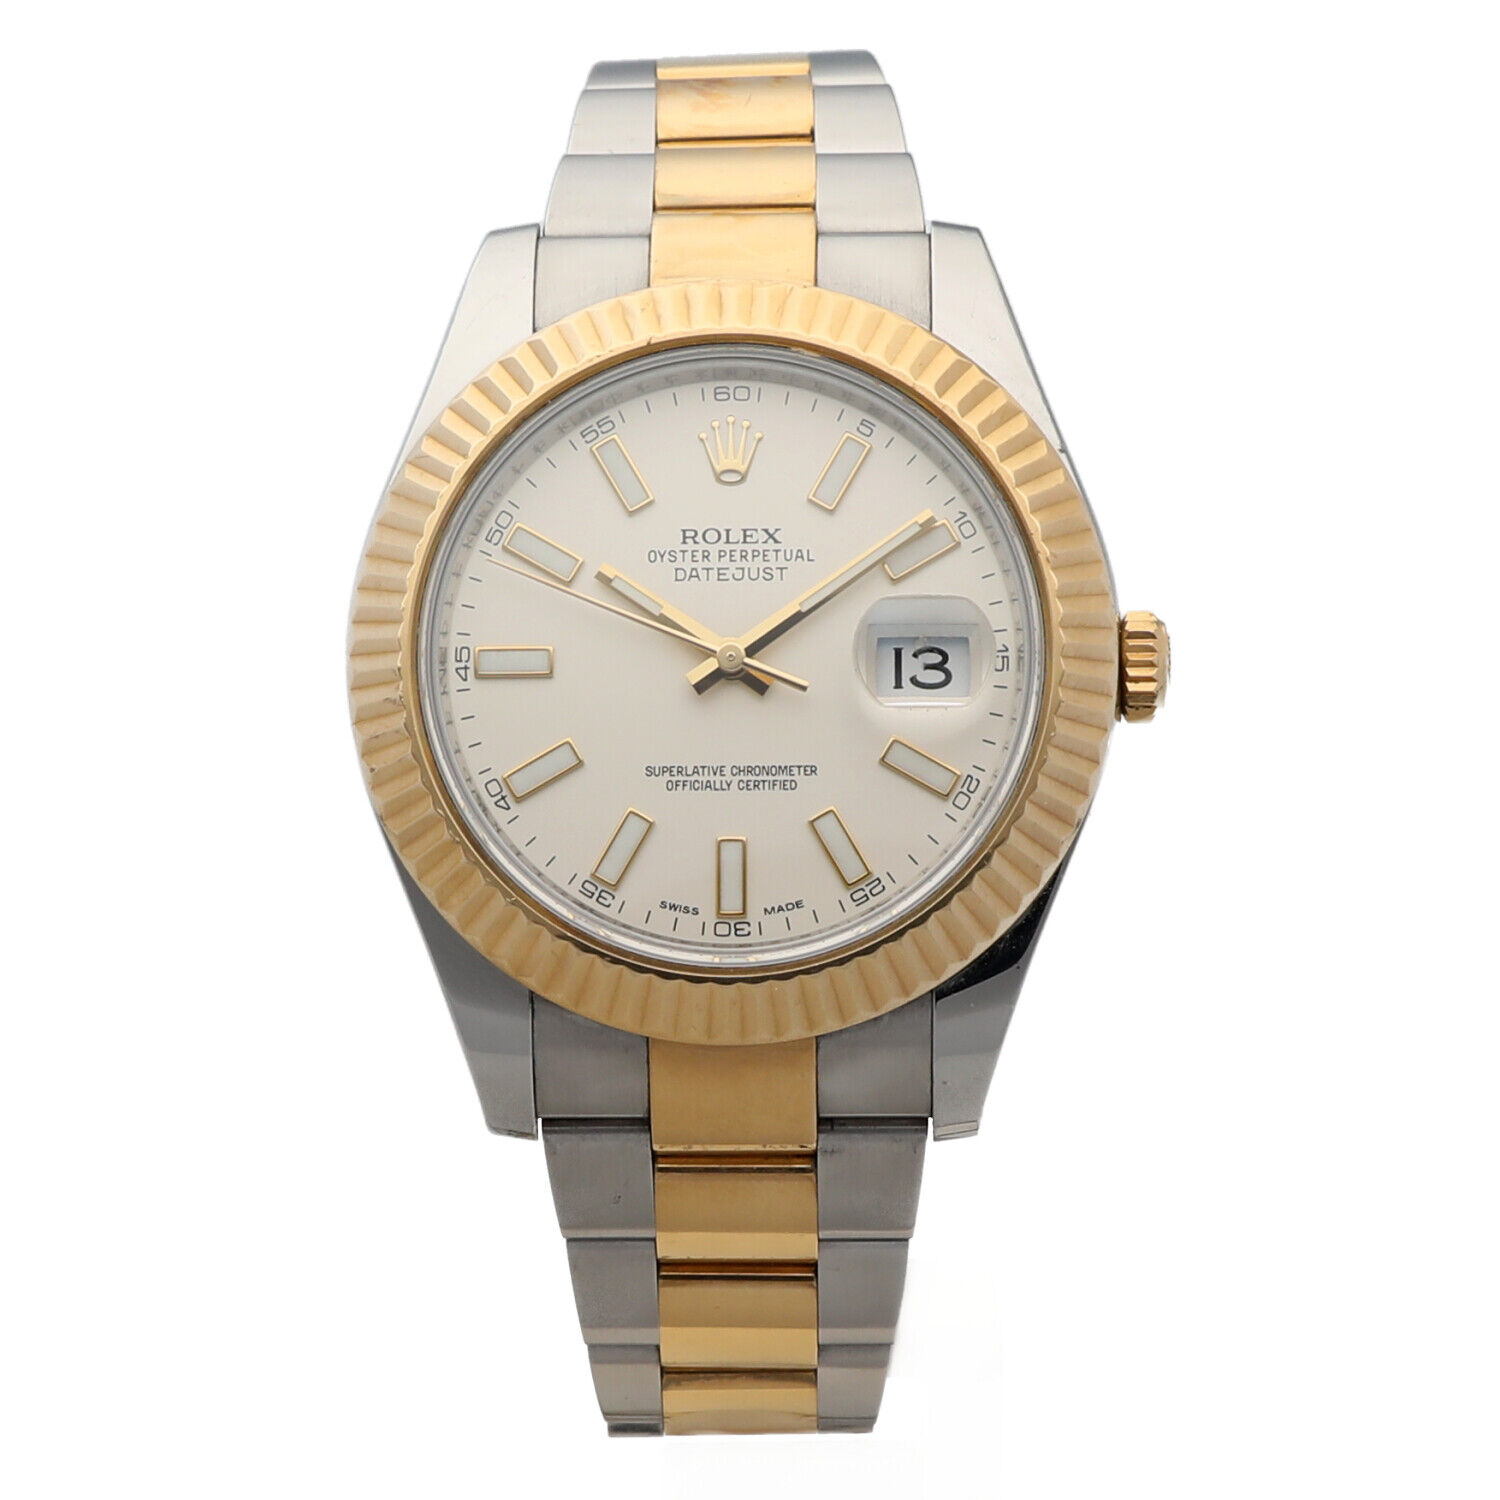 Rolex-Datejust-41-116333-Ivory-Index-Dial-18K-GoldStainless-2015-BP-Mens-Watch-133969059862